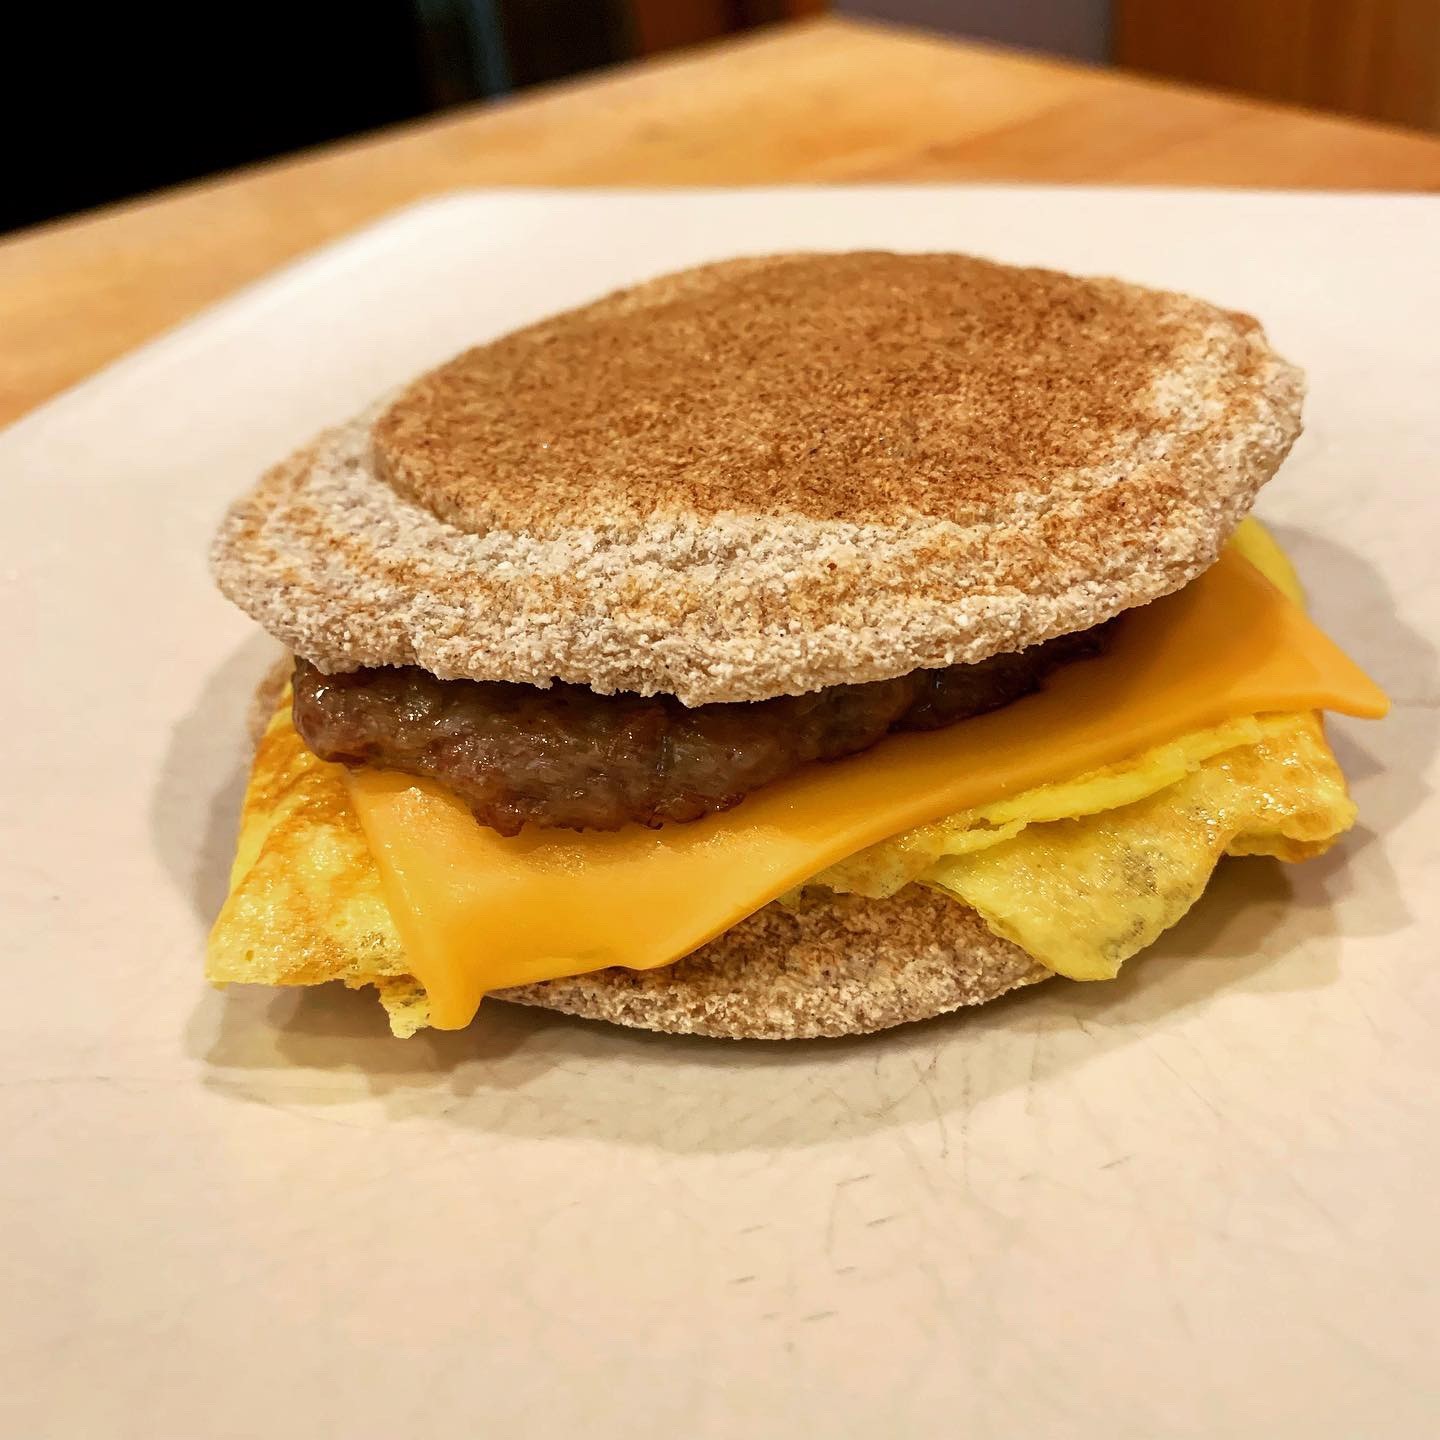 How to Make a McGriddle!